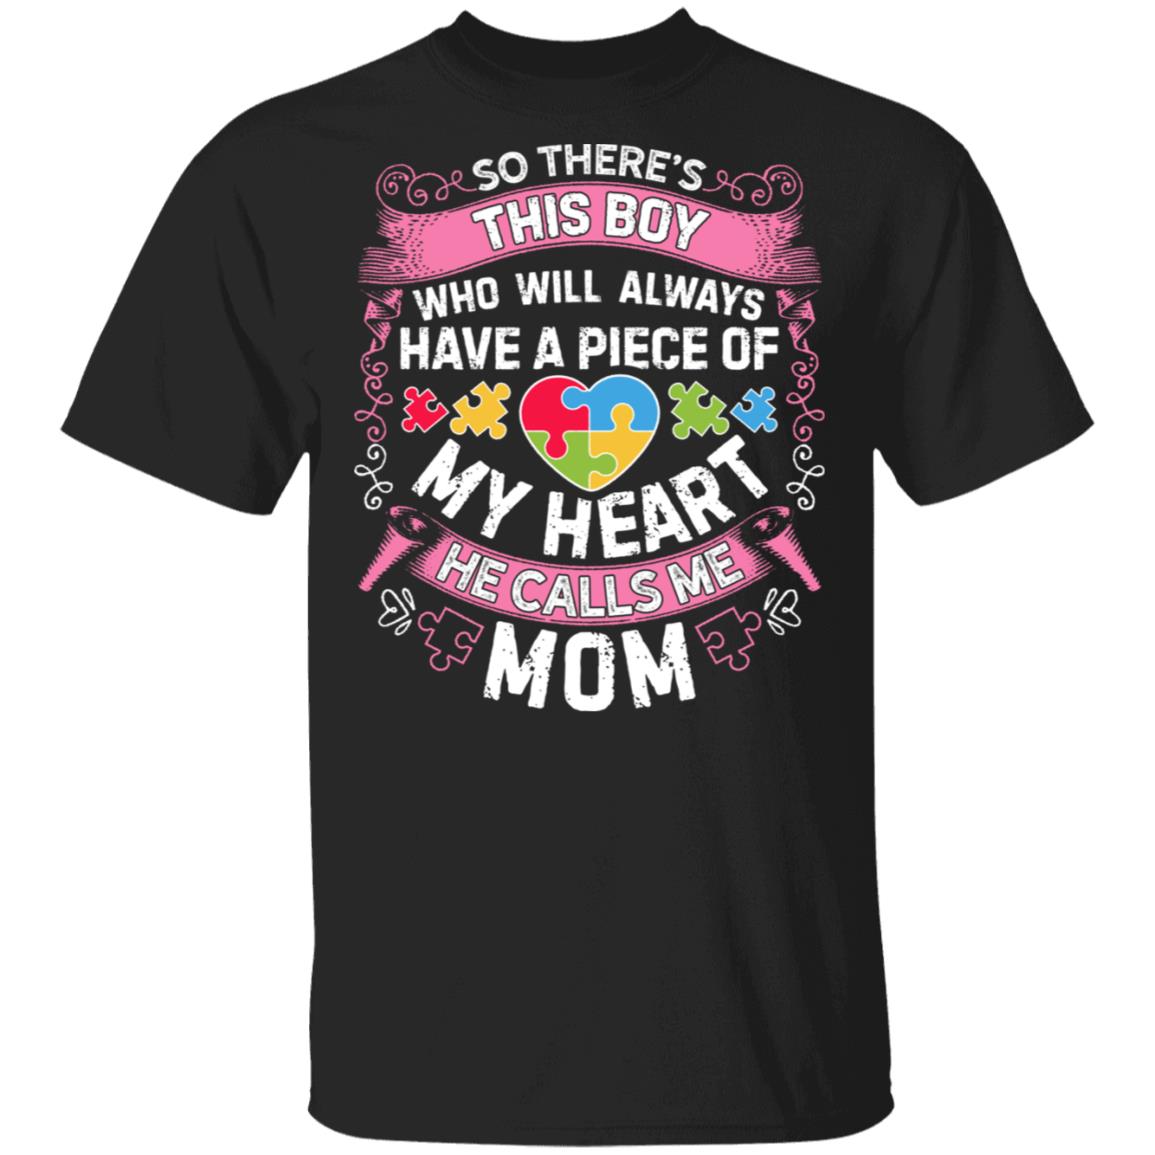 Home - AmazeTees - Trending Shirts For Everyone